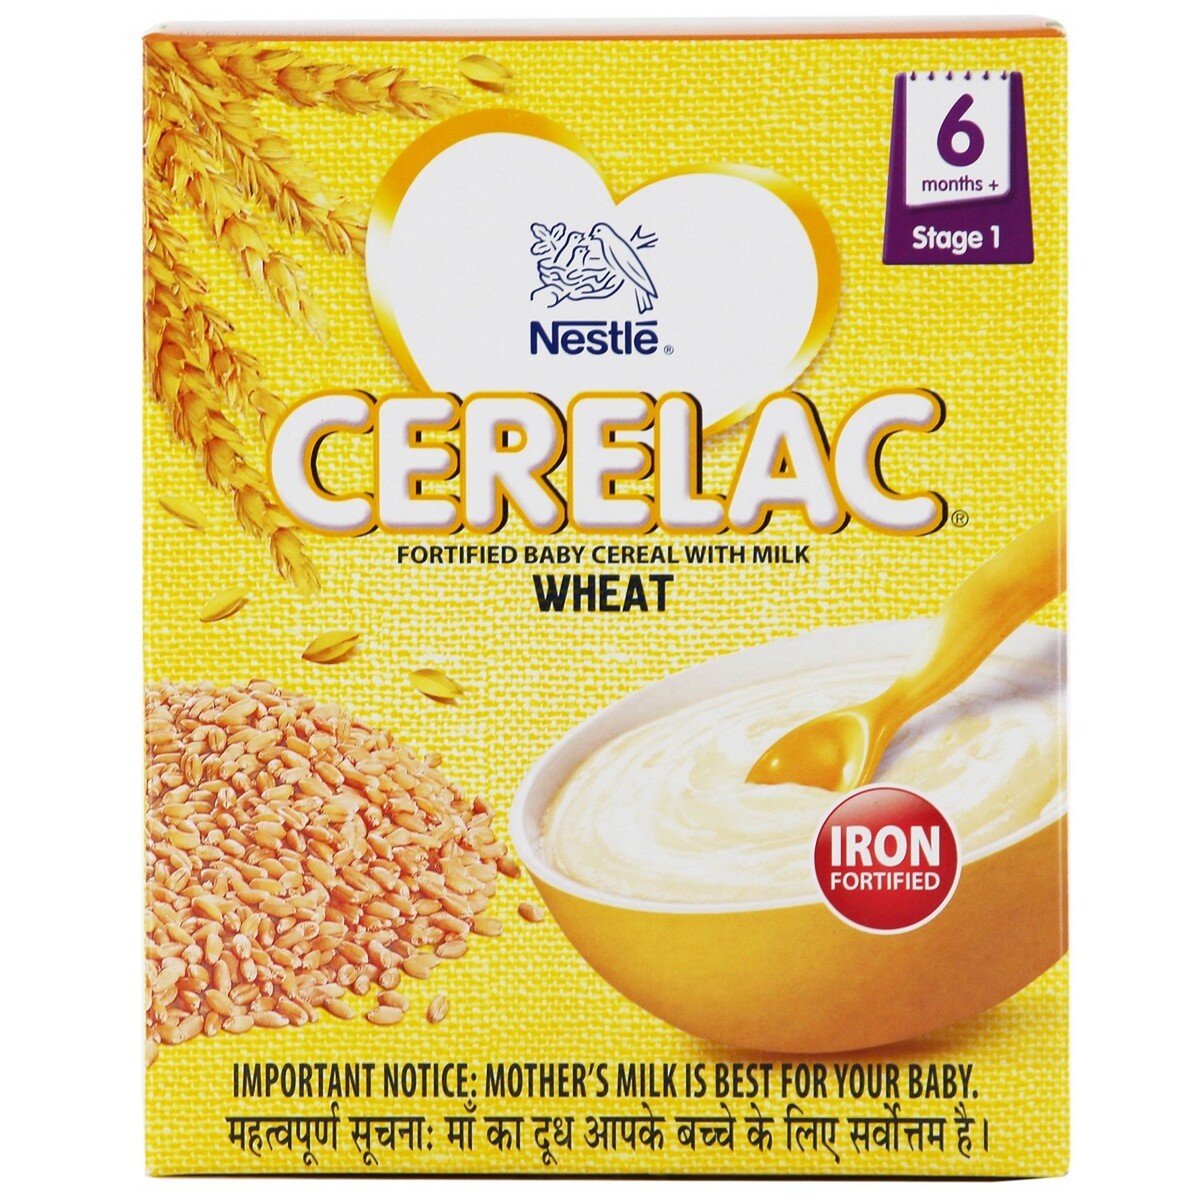 Cerelac Baby Cereal With Milk Wheat Stage-1 300 Gm